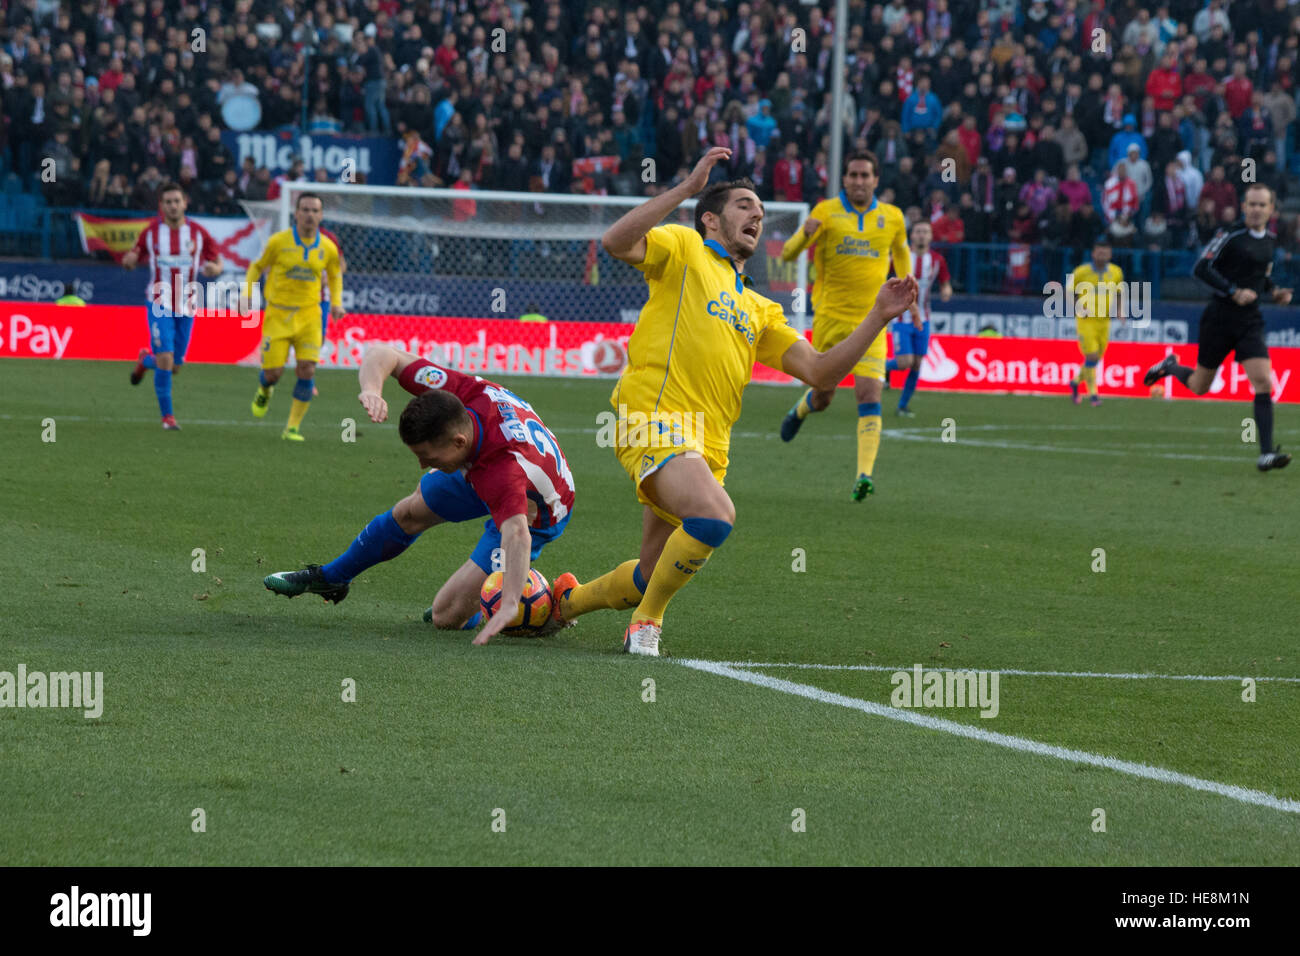 Madrid, Spain. 17th Dec, 2016. Gameiro (L) fall down at the same time than Bigas (R). Atletico de Madrid won by 1 to 0 over Las Palmas whit a great goal of Saúl Ñiguez. © Jorge Gonzalez/Pacific Press/Alamy Live News Stock Photo